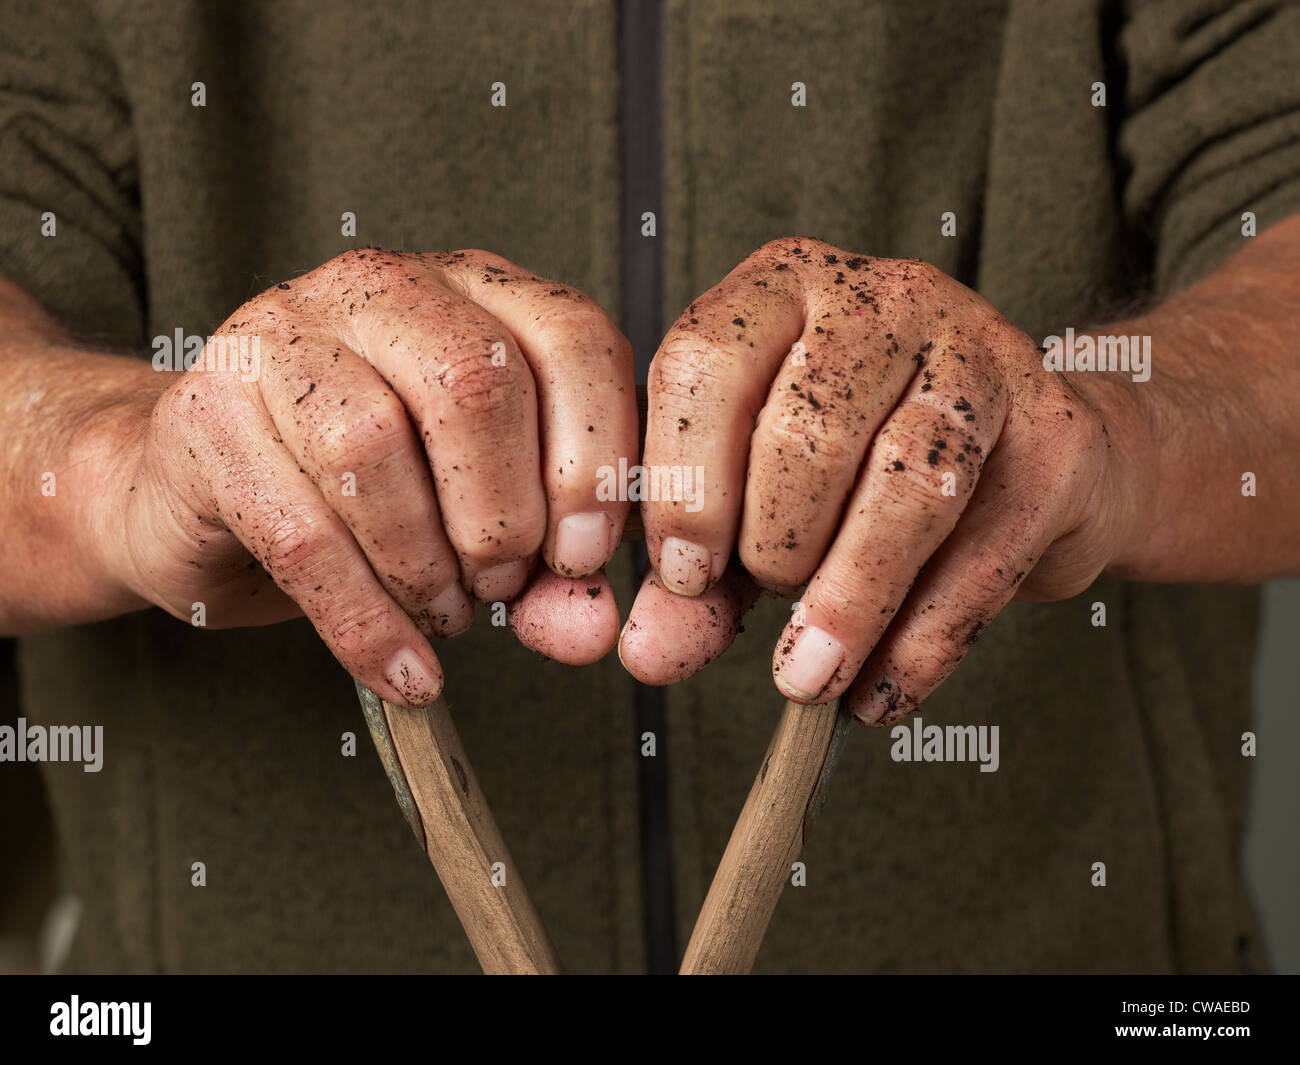 Man leaning with hands on wooden handle Stock Photo